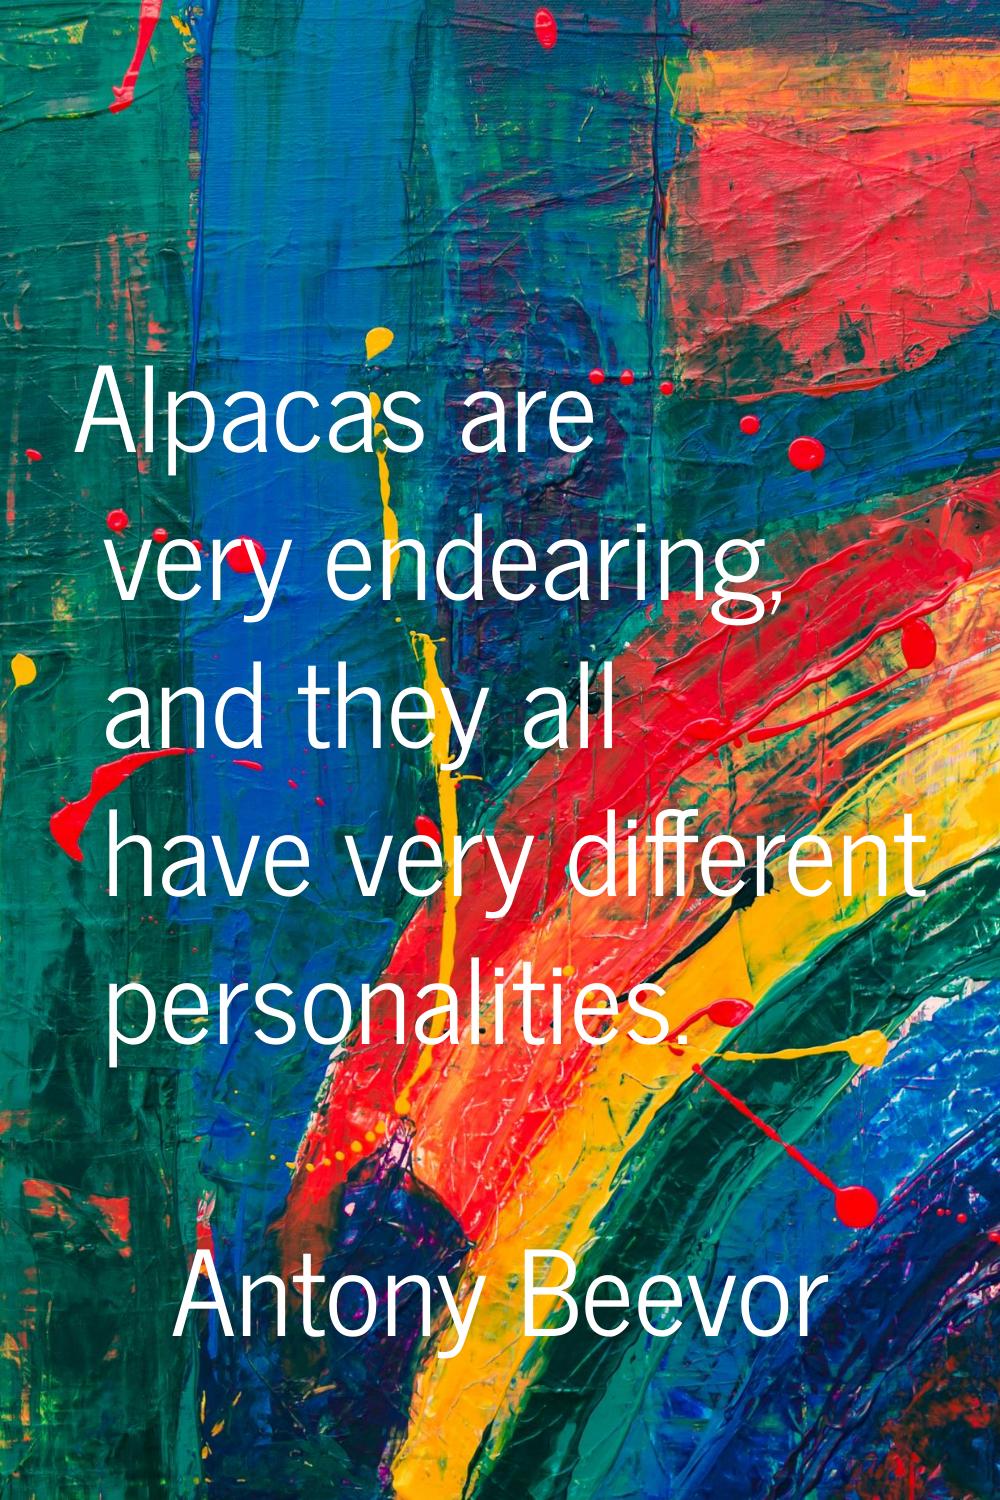 Alpacas are very endearing, and they all have very different personalities.